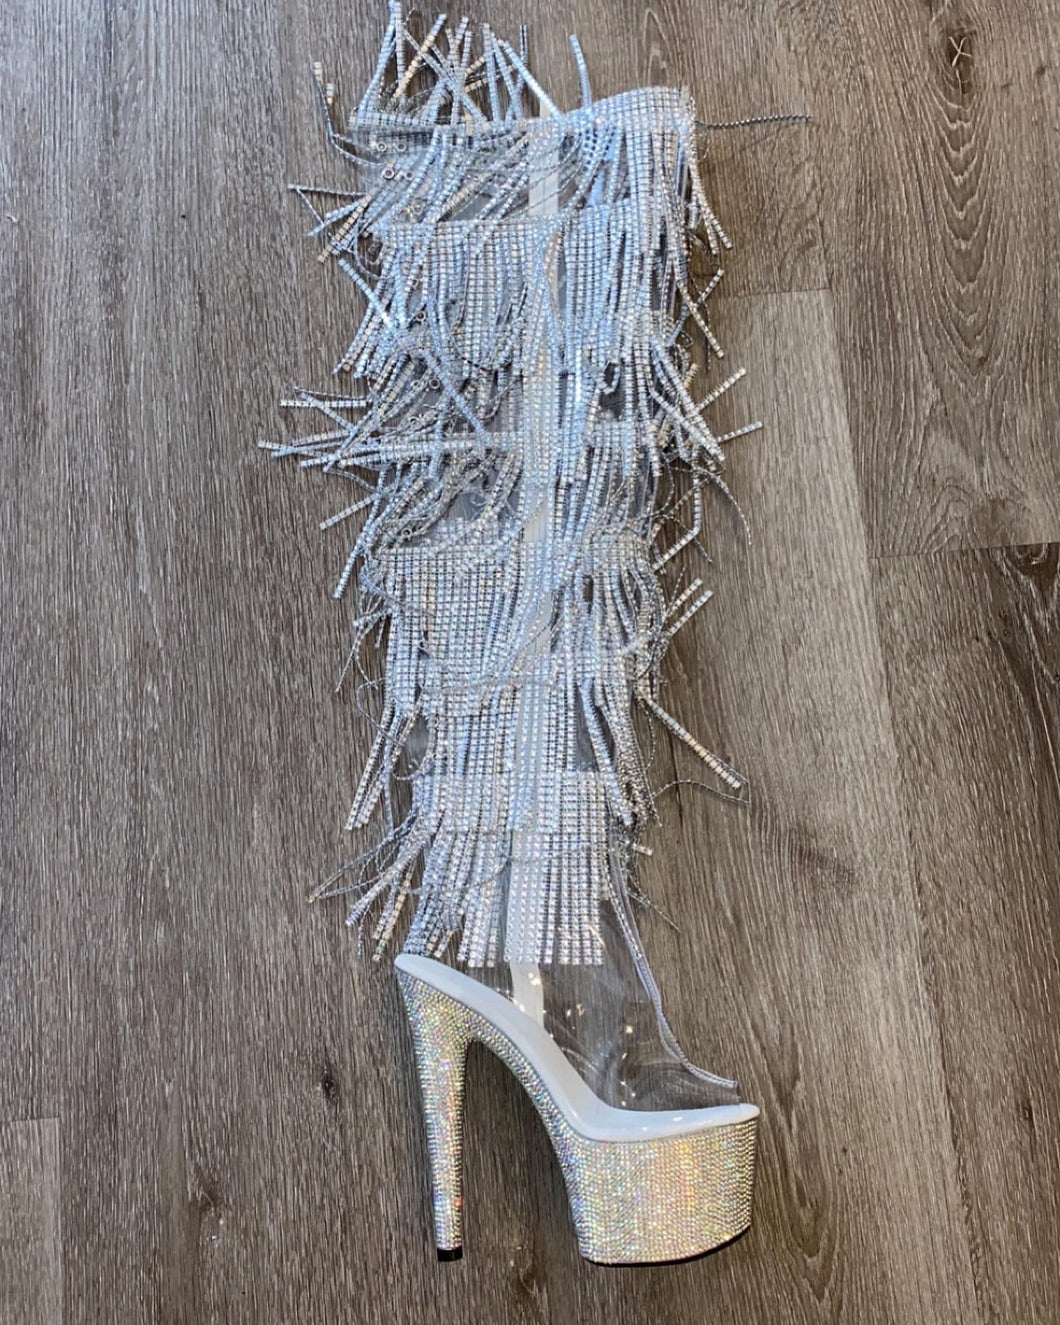 CLEAR THIGH HIGH FRINGE BOOTS WITH RHINESTONE HEEL